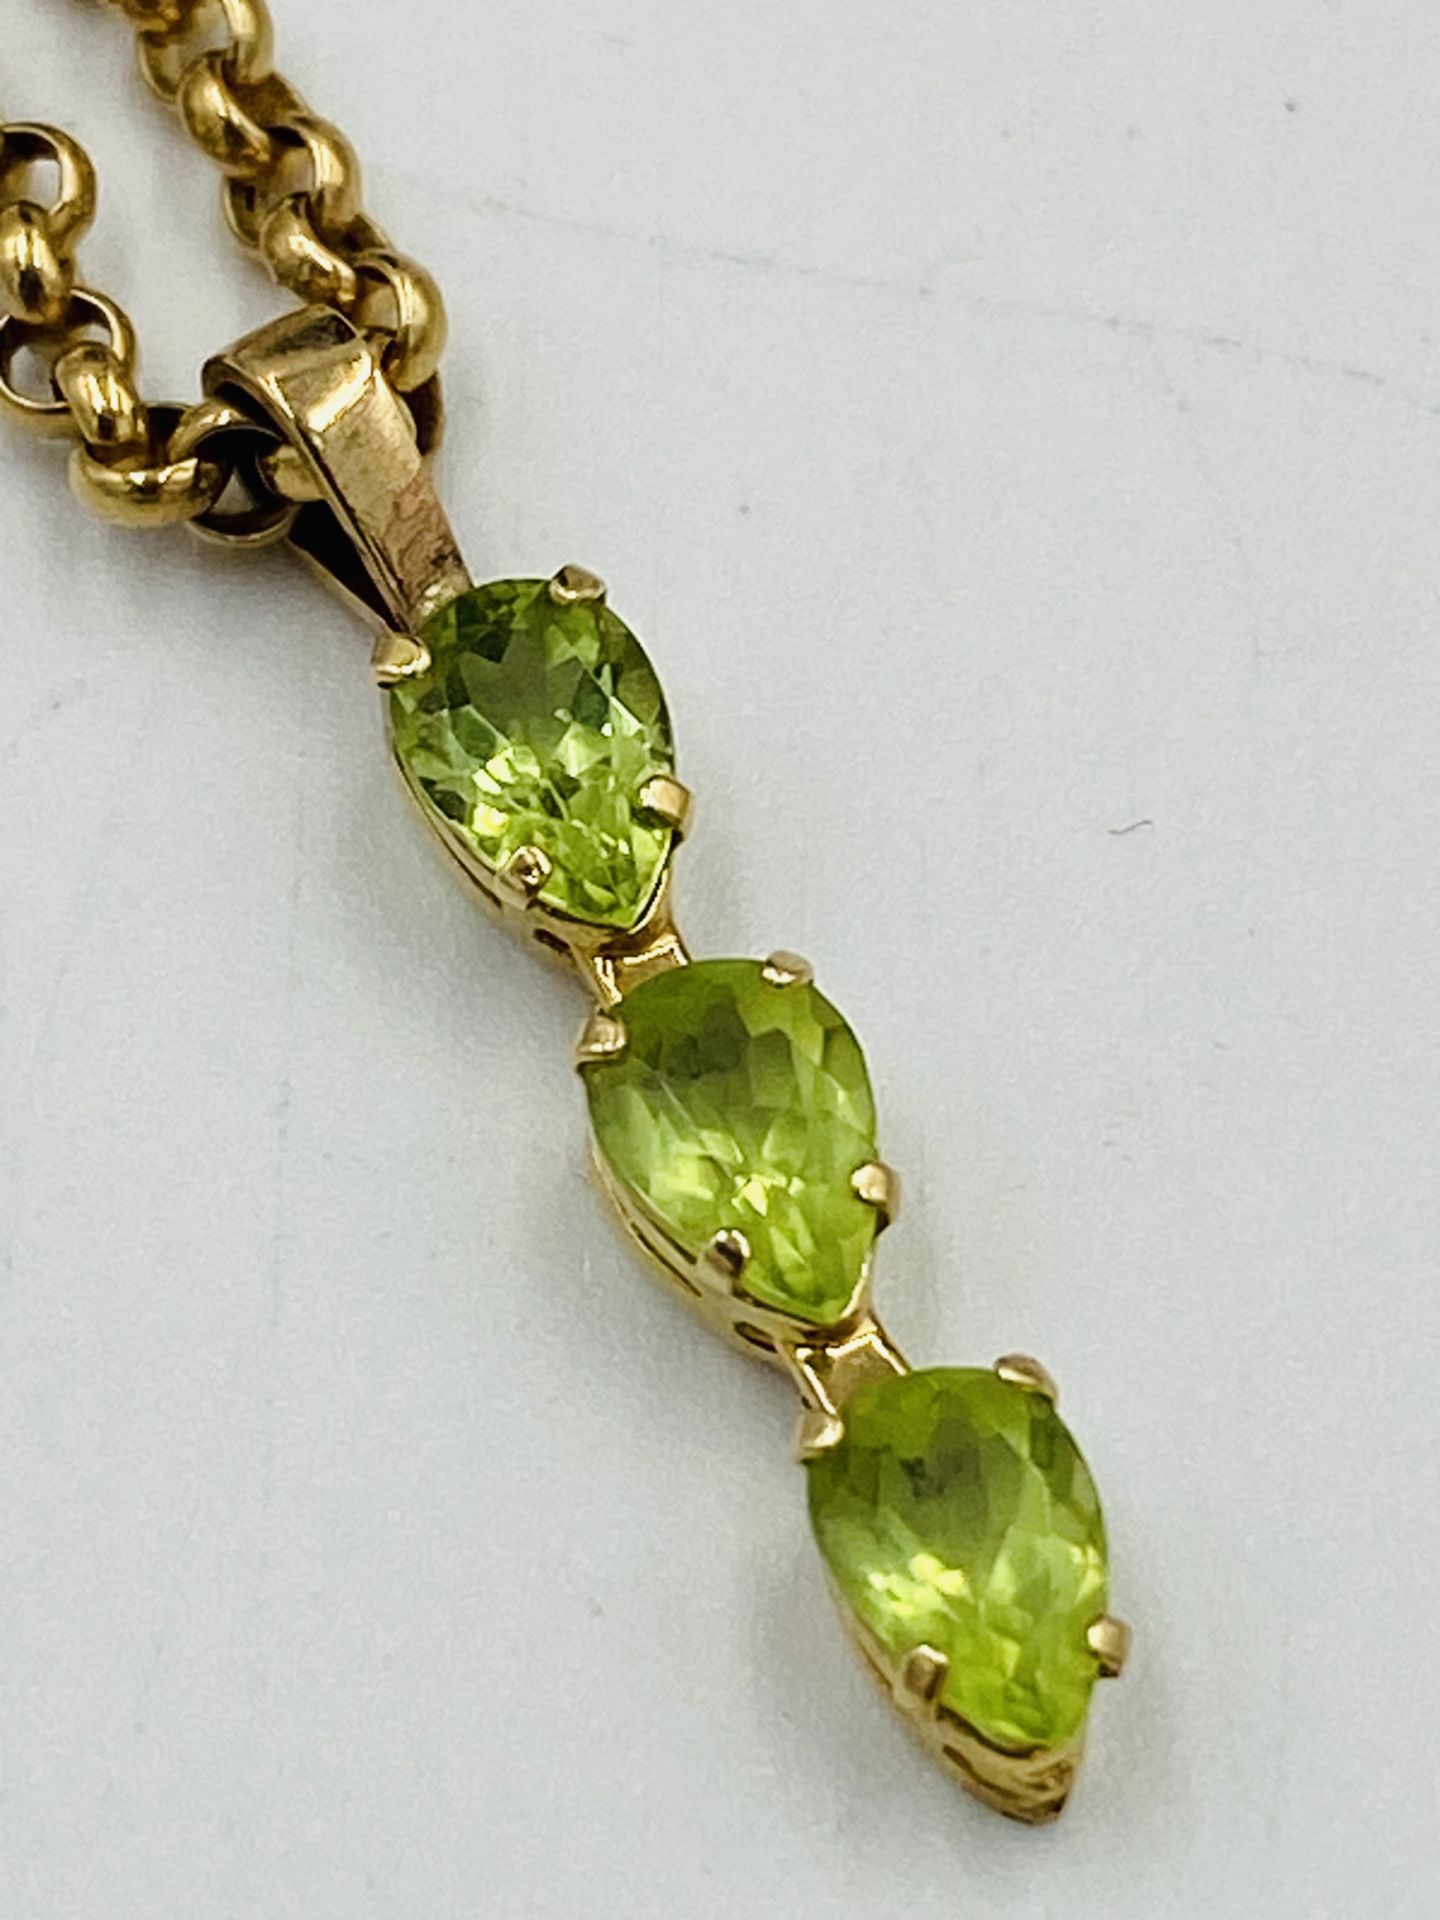 9ct gold chain with yellow metal and green stone pendant - Image 2 of 5